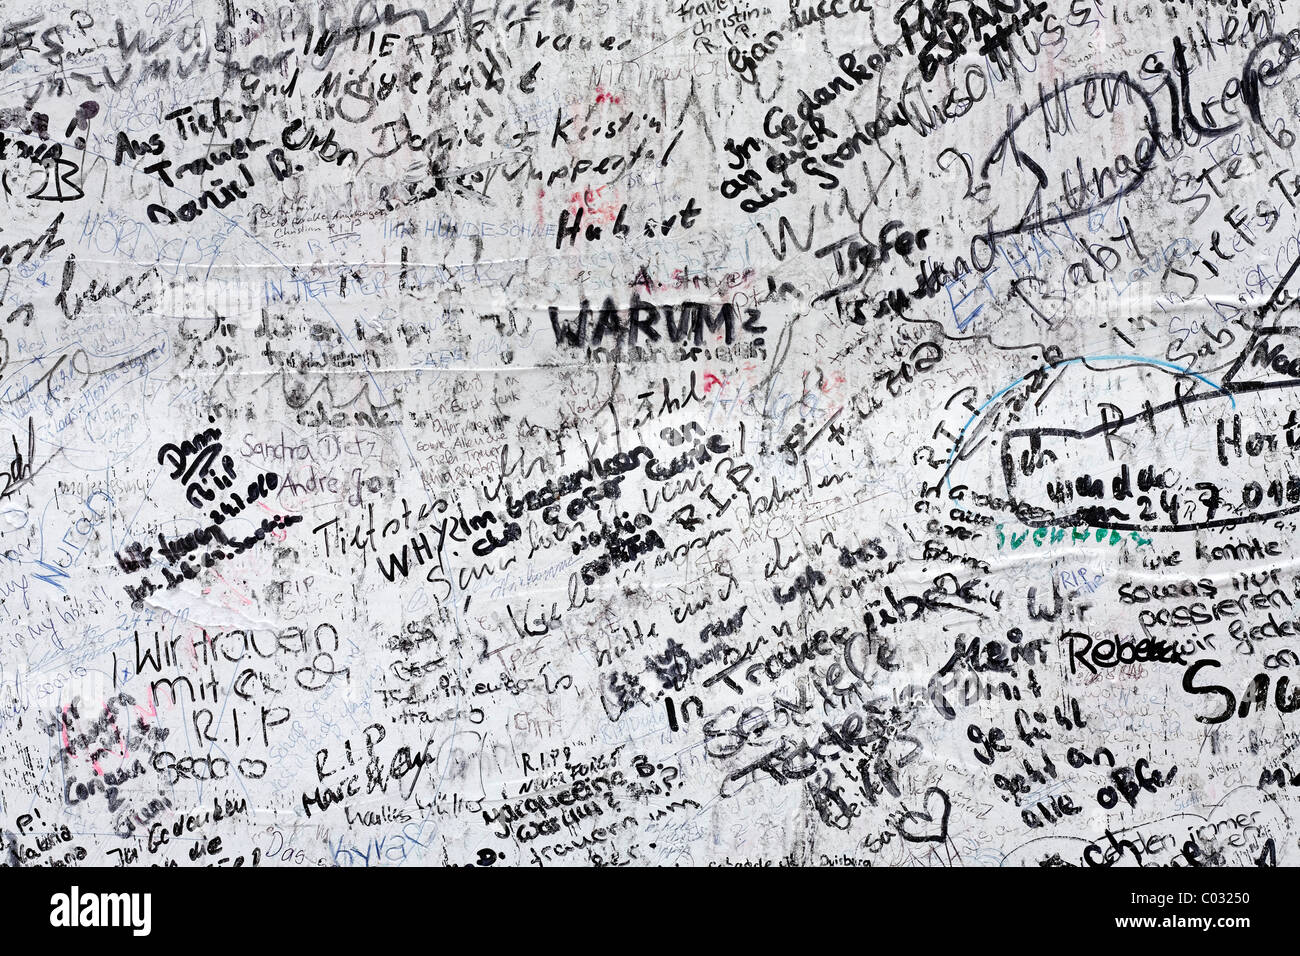 Poster with sympathetic notes and signatures, to remember the victims of the crowd crush at the Loveparade 2010, Duisburg Stock Photo